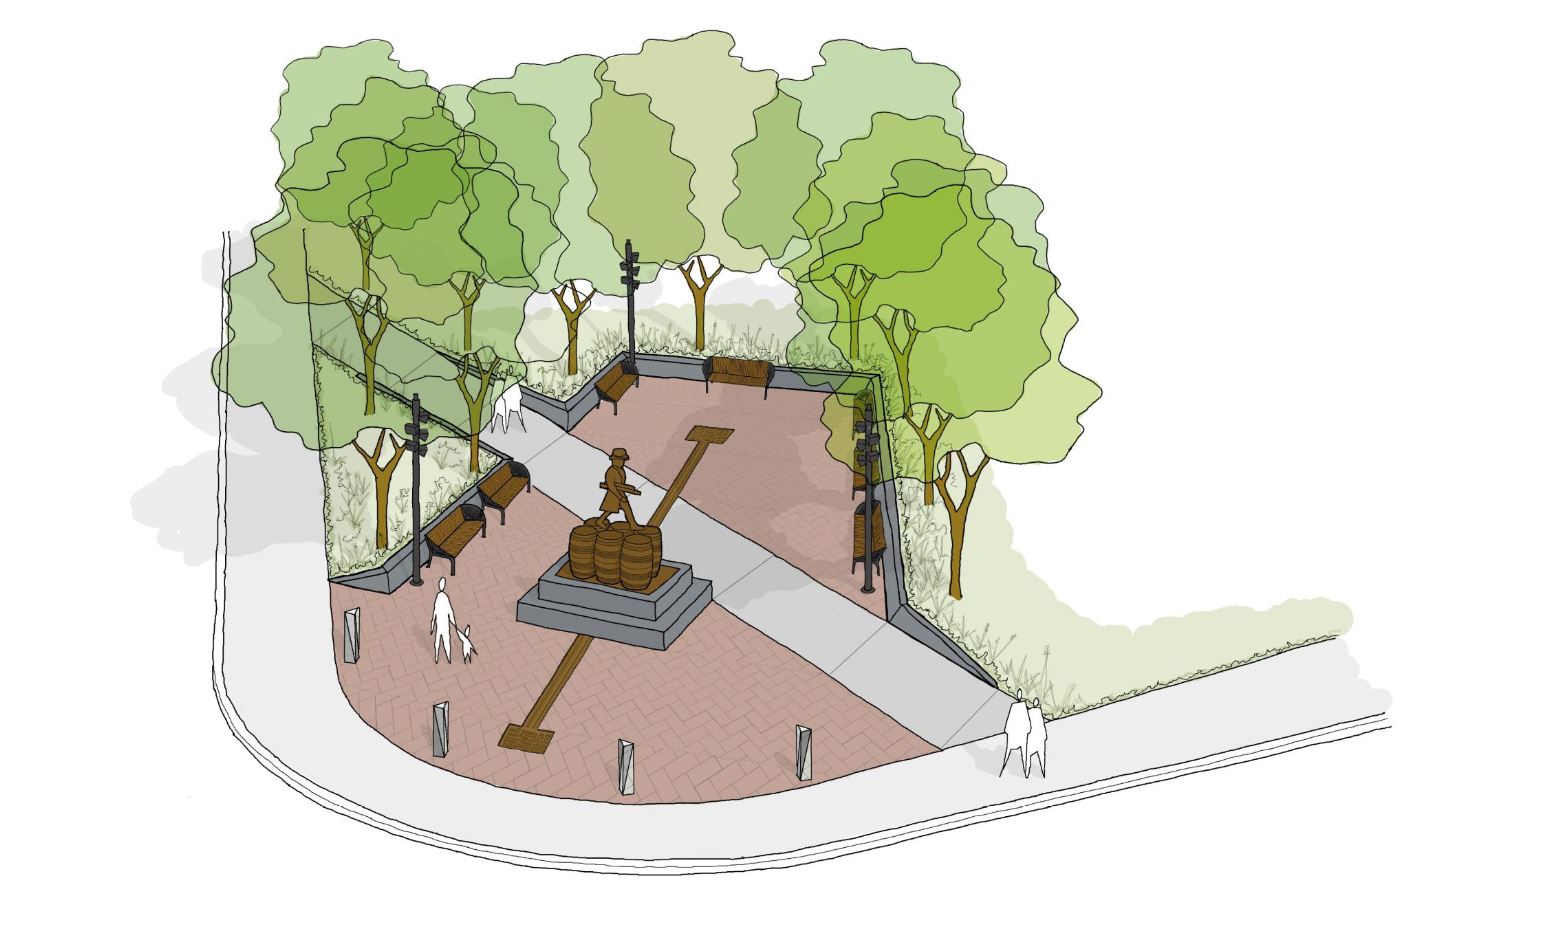 Concept sketch of statue, trees and walkway from above